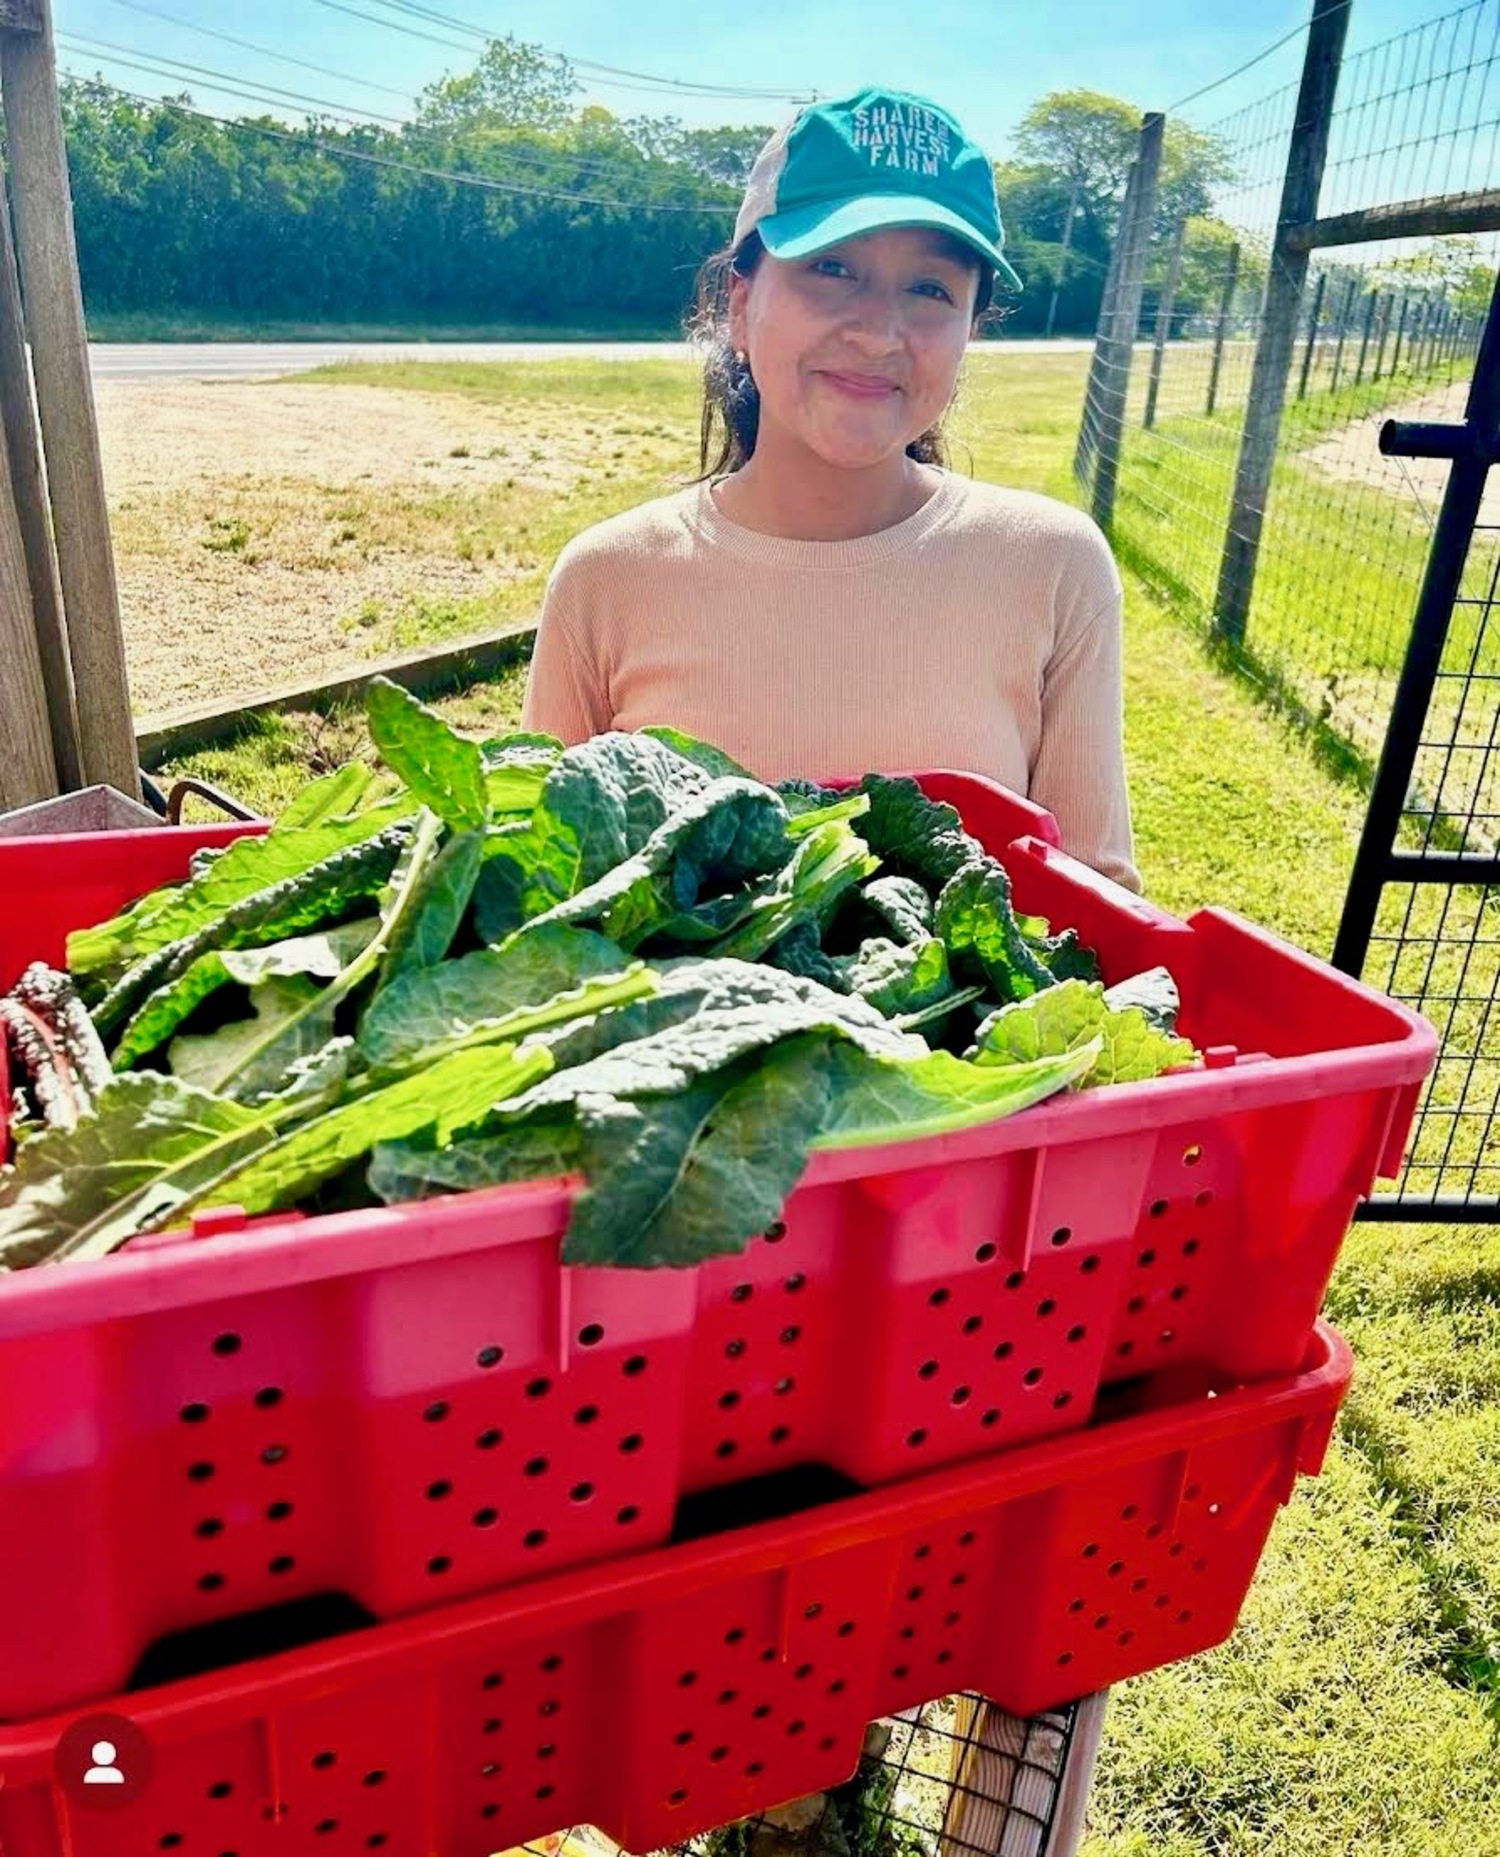 Carmen Quintano, a member of the farm field crew, delivering fresh picked kale to the Share The Harvest farm stand. COURTESY SHARE THE HARVEST FARM